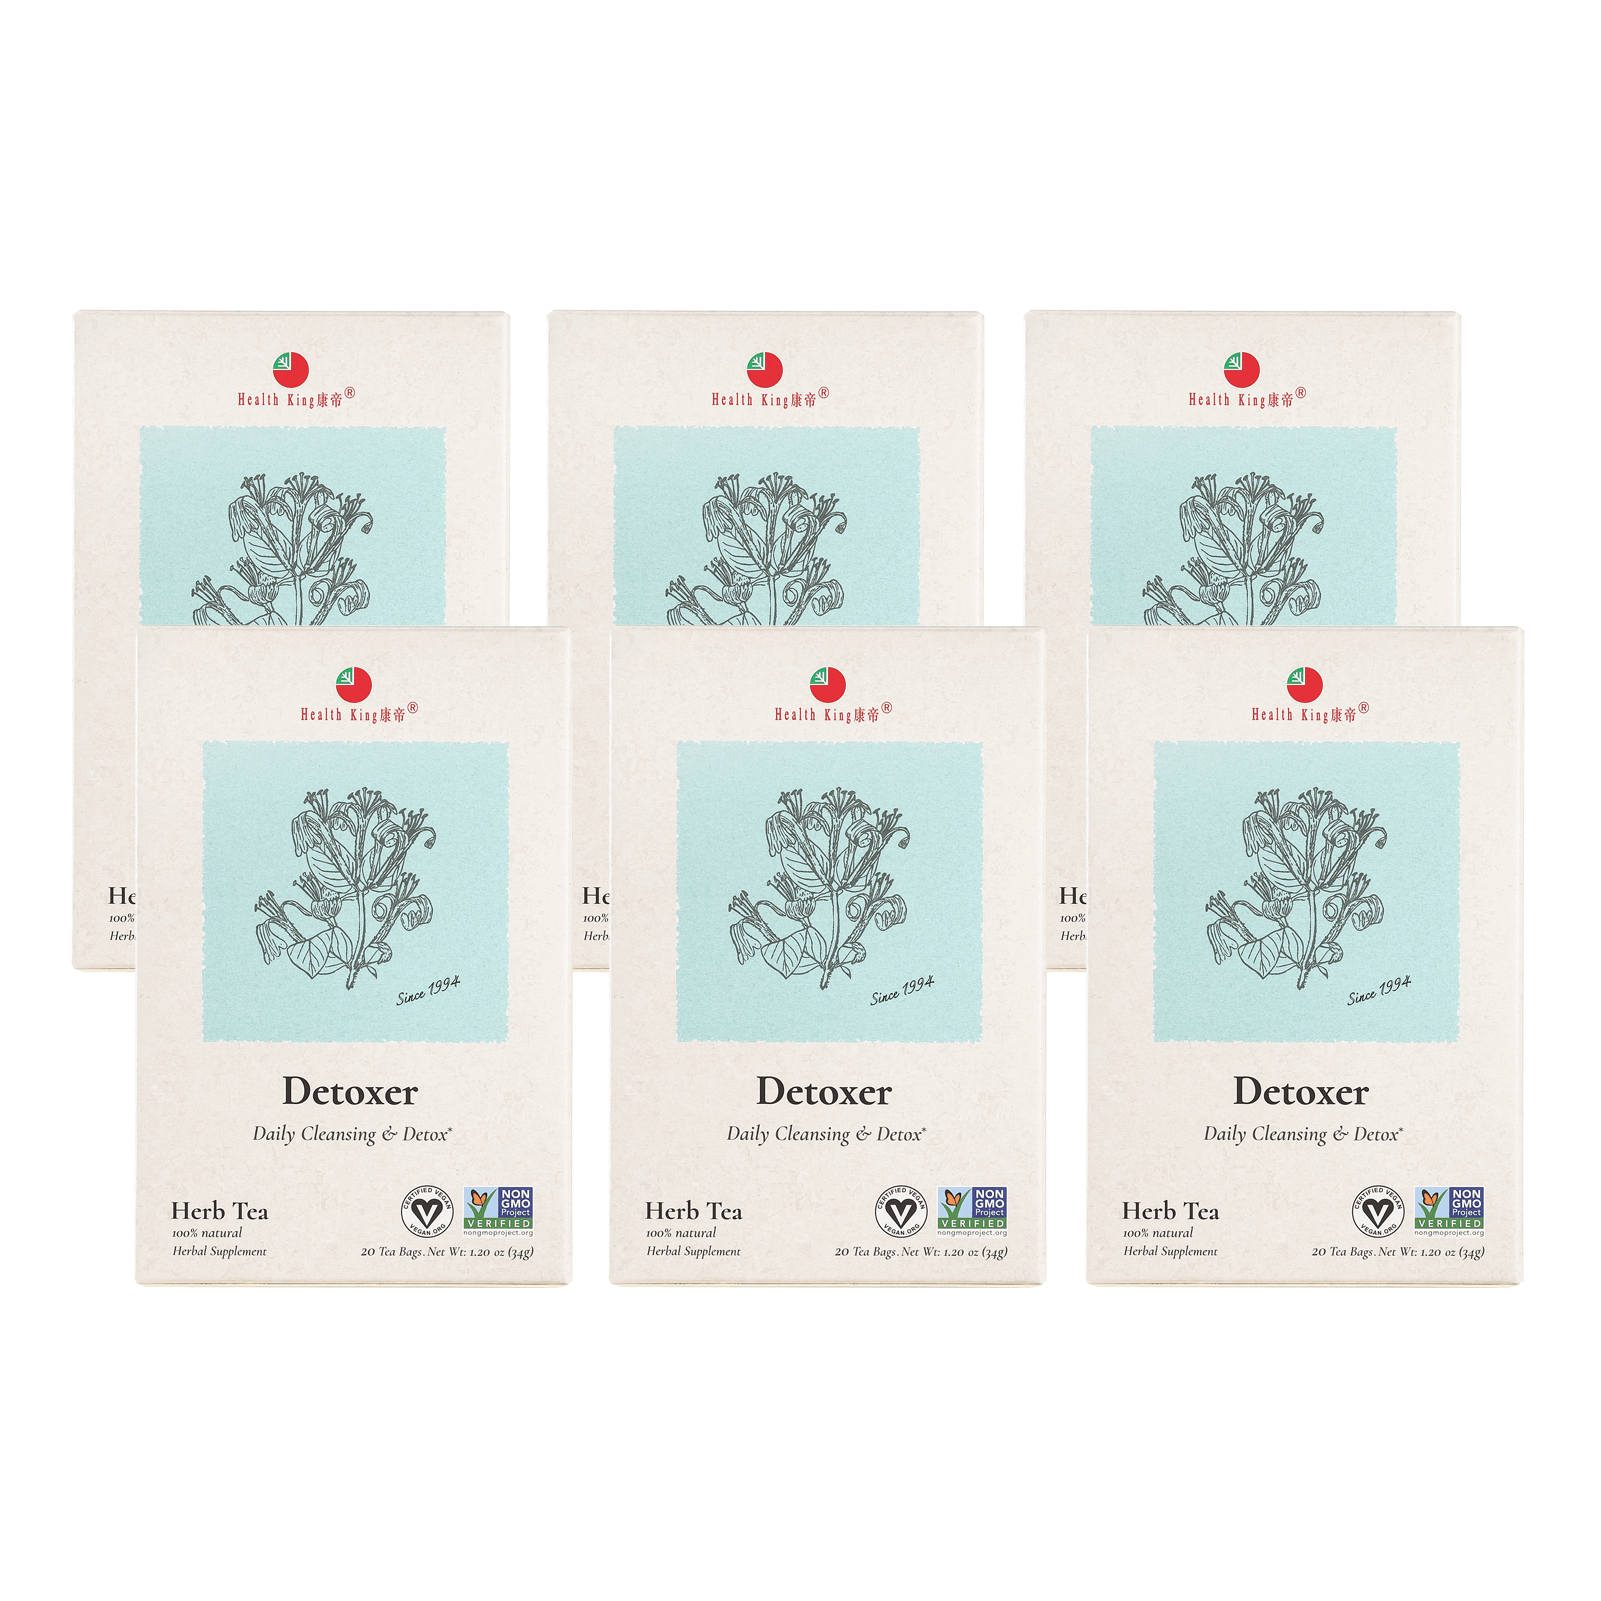 Six packs of Detoxer Herb Tea with blue and white packaging